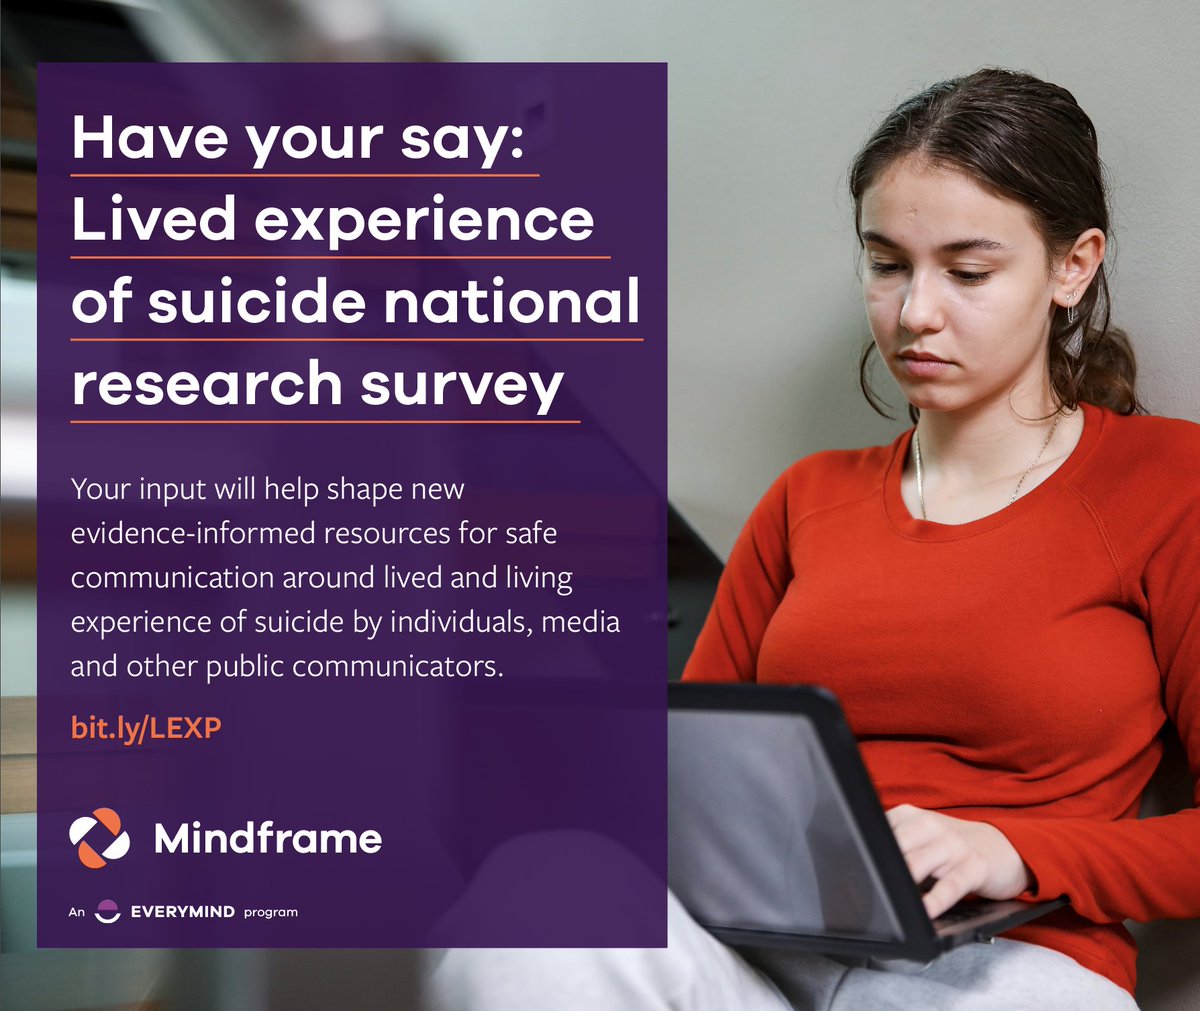 Everymind is surveying people with lived & living experience of suicide to inform new resources that will help individuals, along with media and others who may be assisting them, in sharing their stories. Read more about how you can take part: bit.ly/LEXP